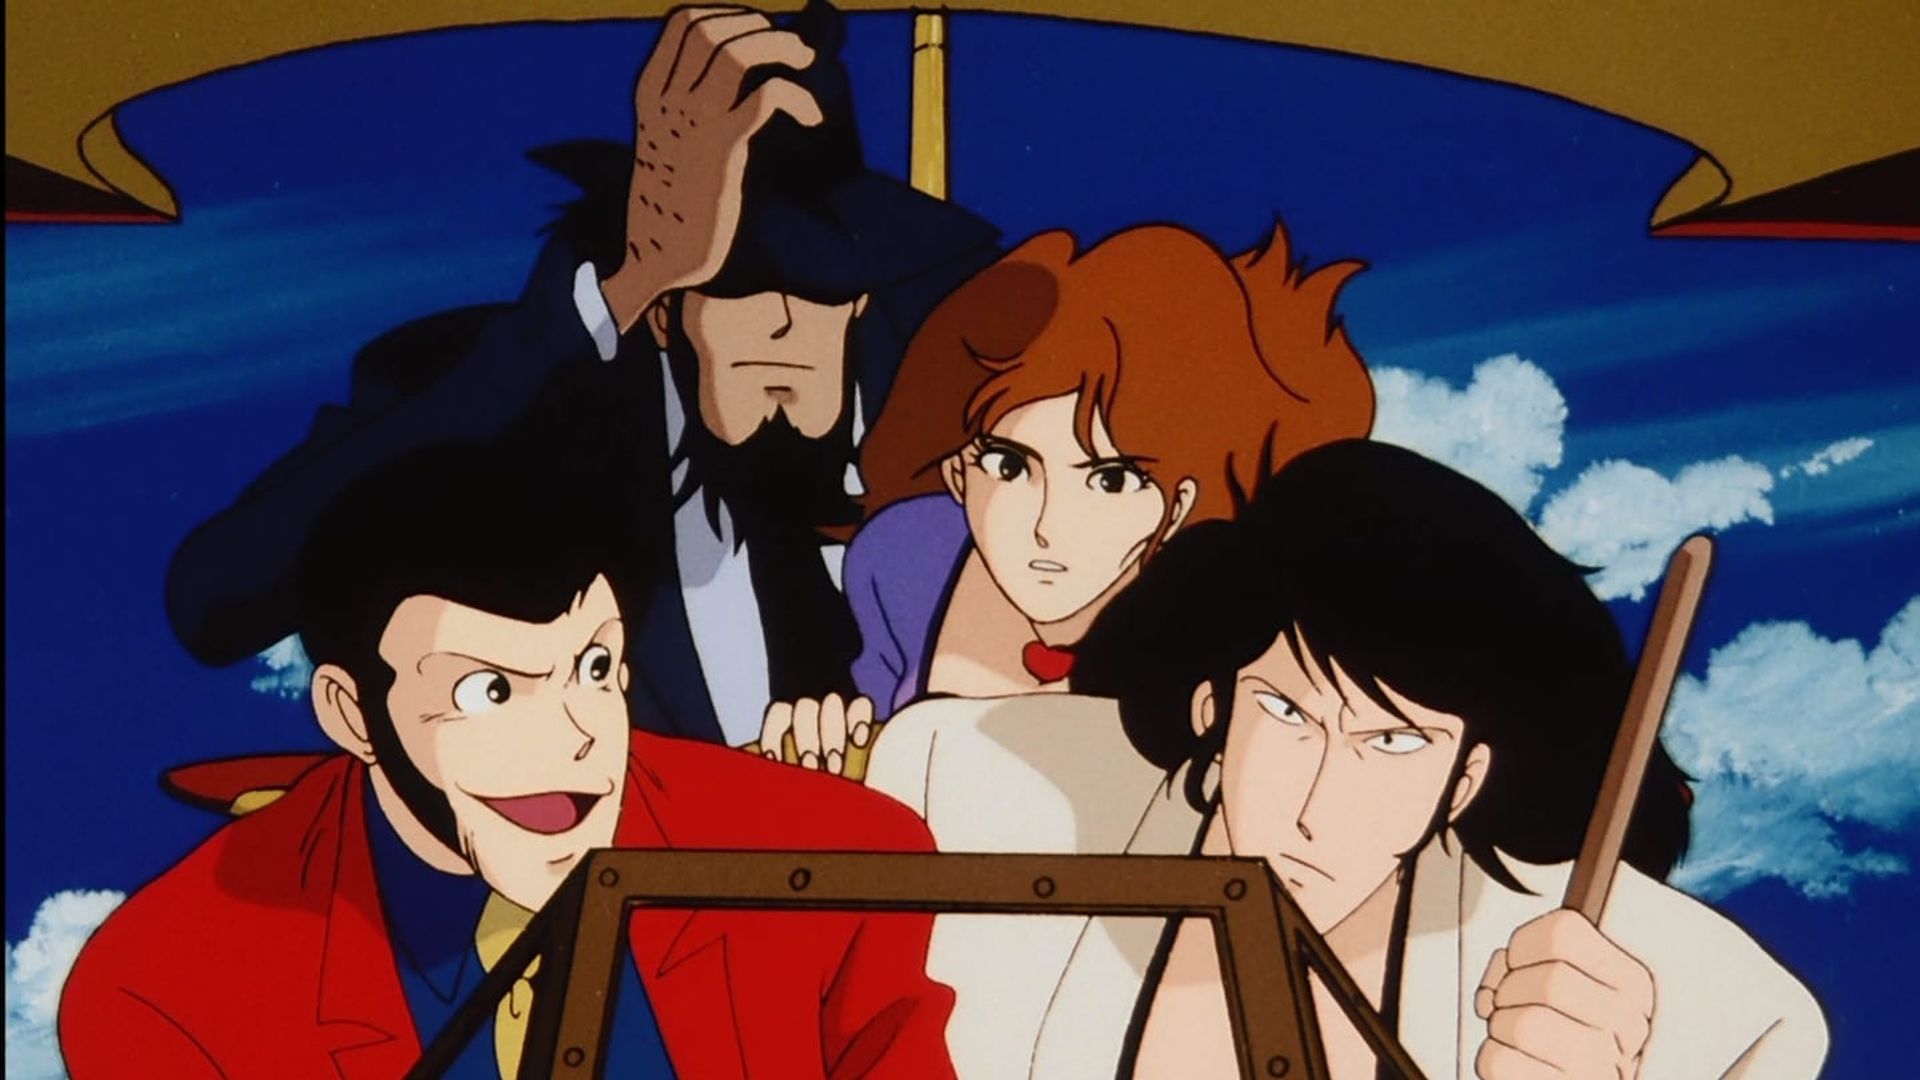 Lupin the Third: Dragon of Doom background